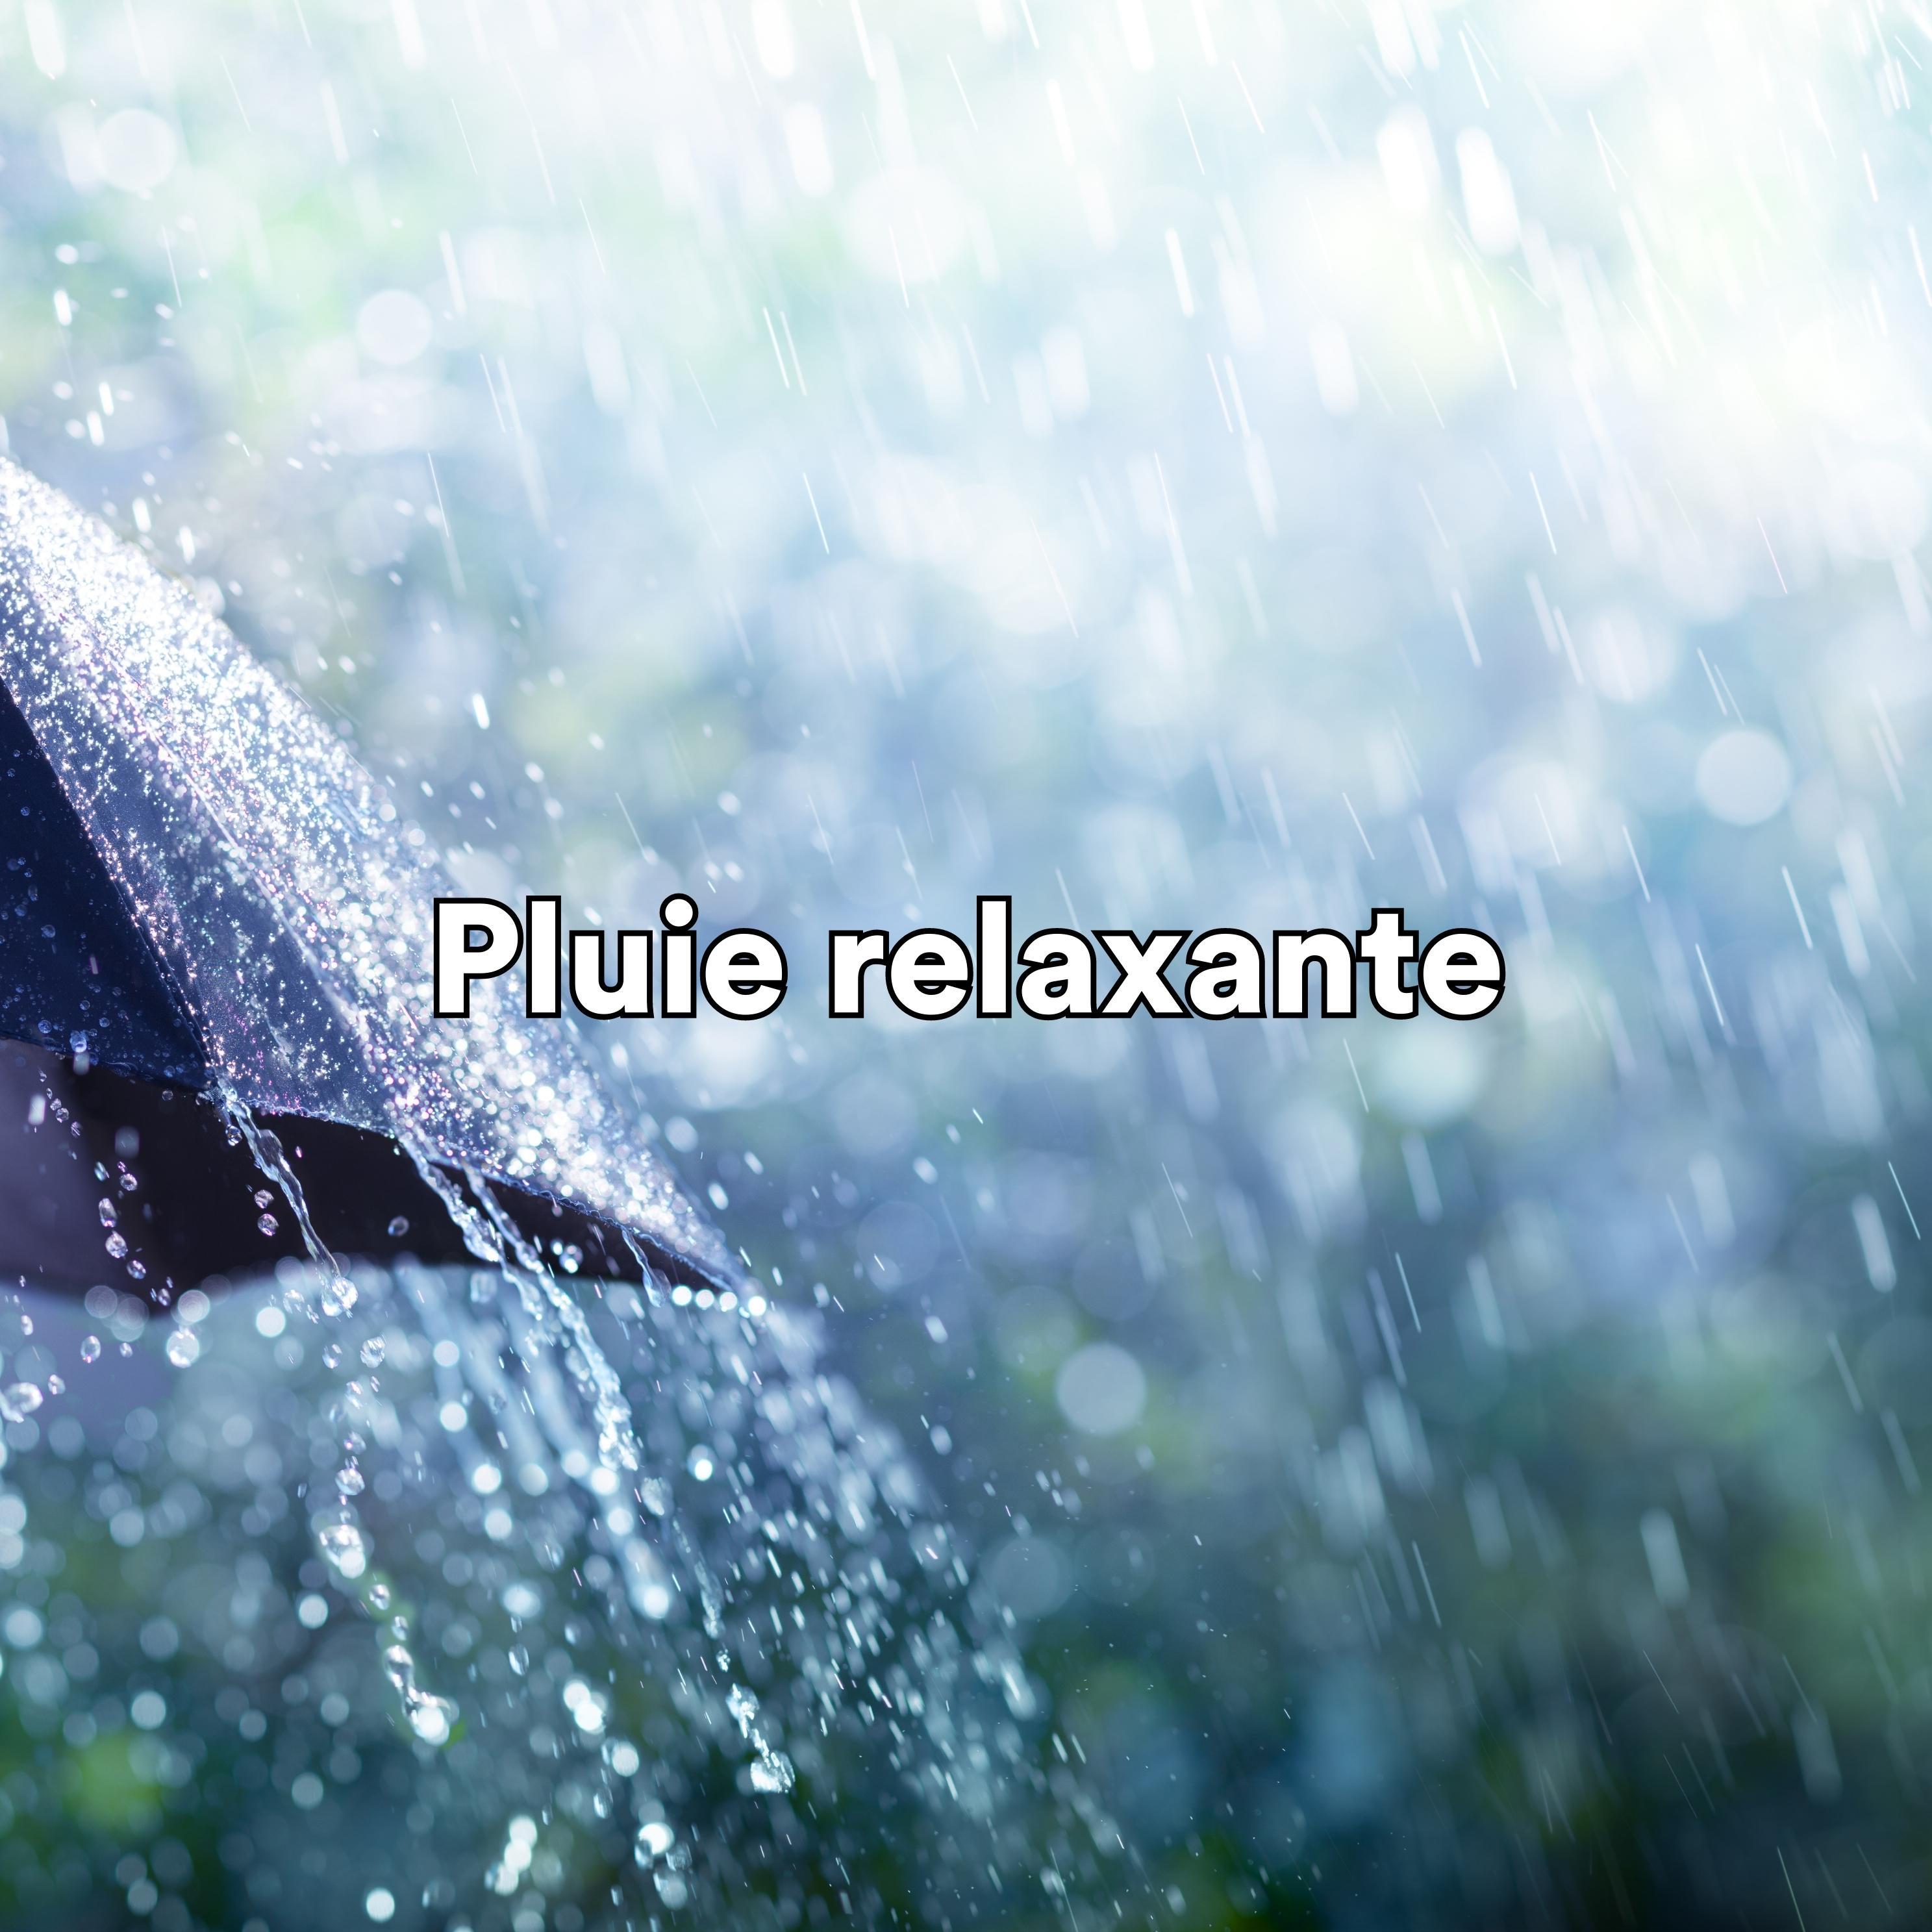 Rain - Soothing Shower Serenade (Calming and Meditative Music for Relaxation)